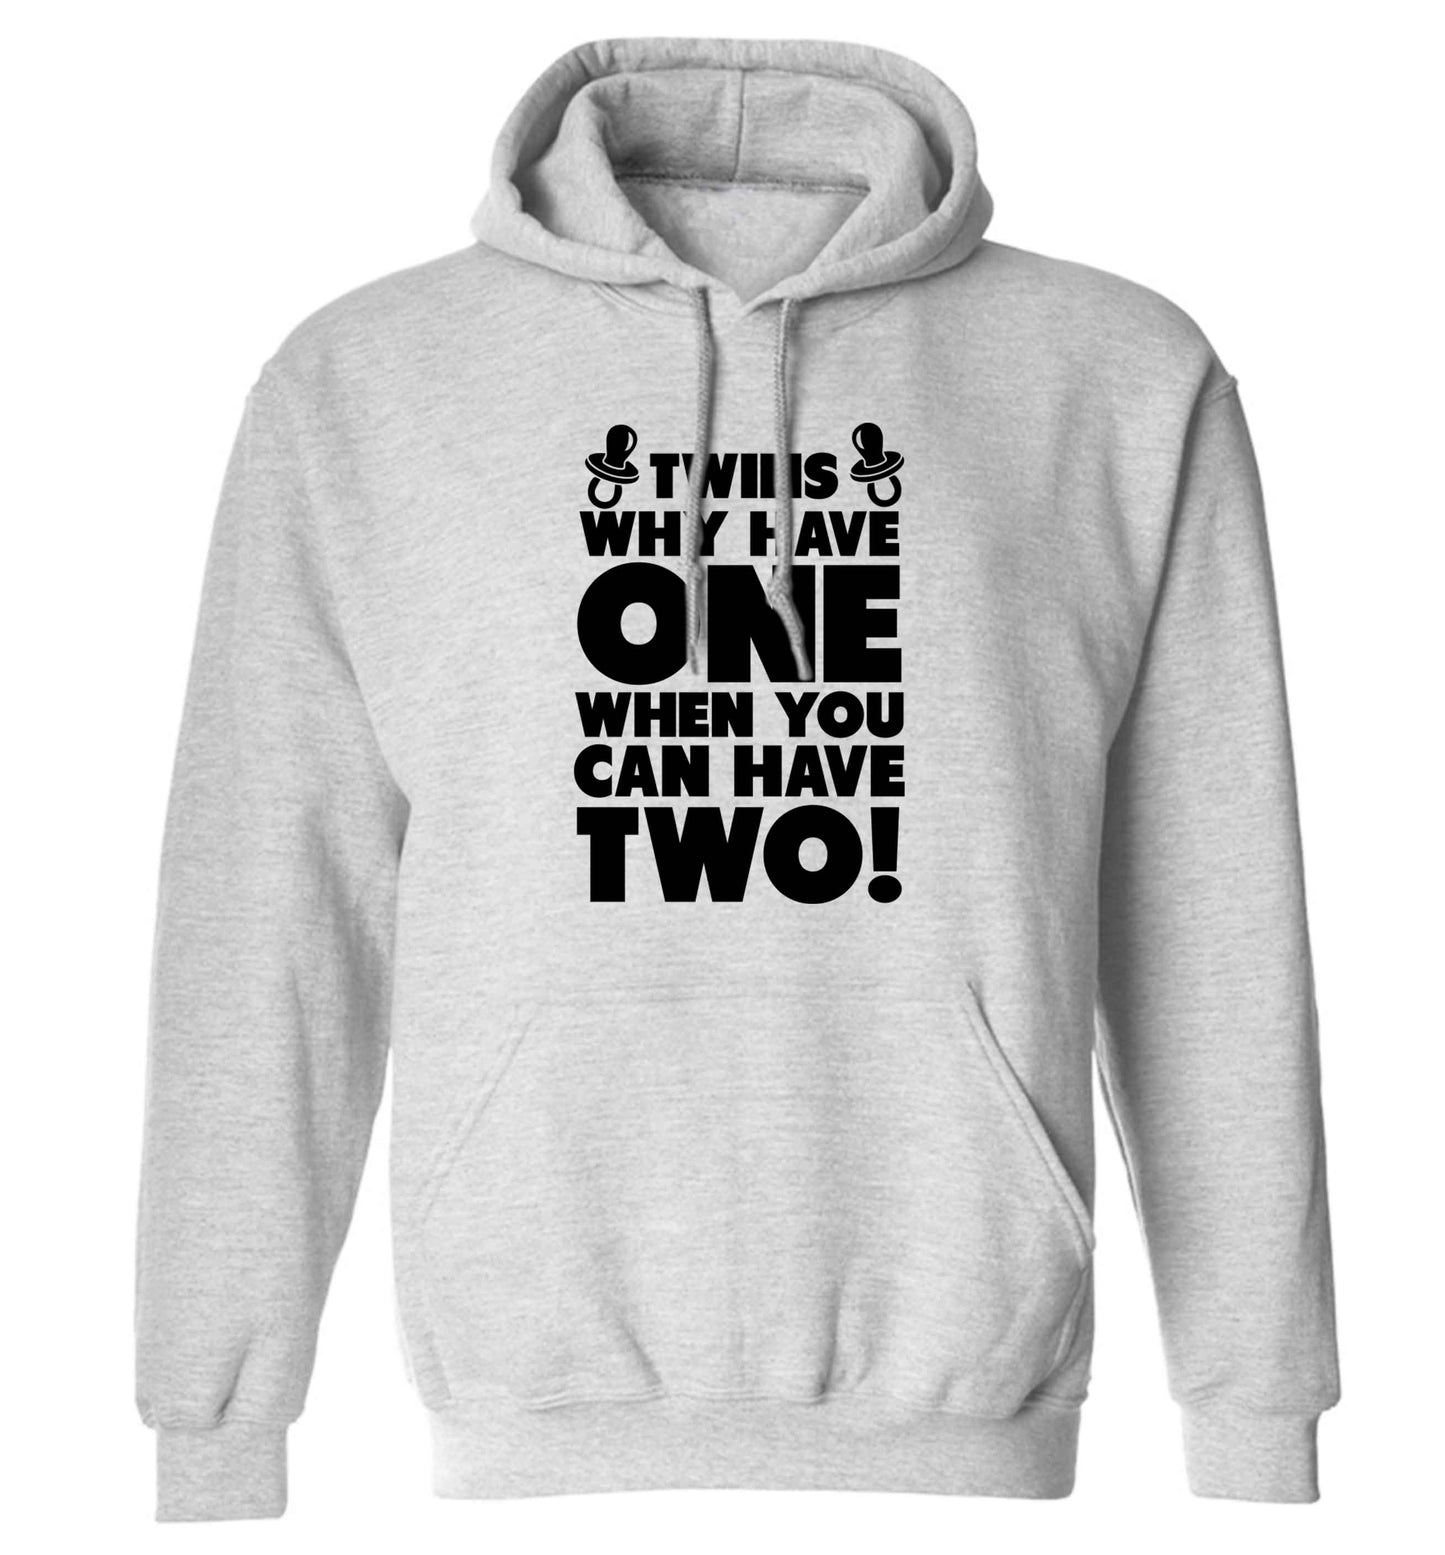 Twins why have one when you can have two adults unisex grey hoodie 2XL